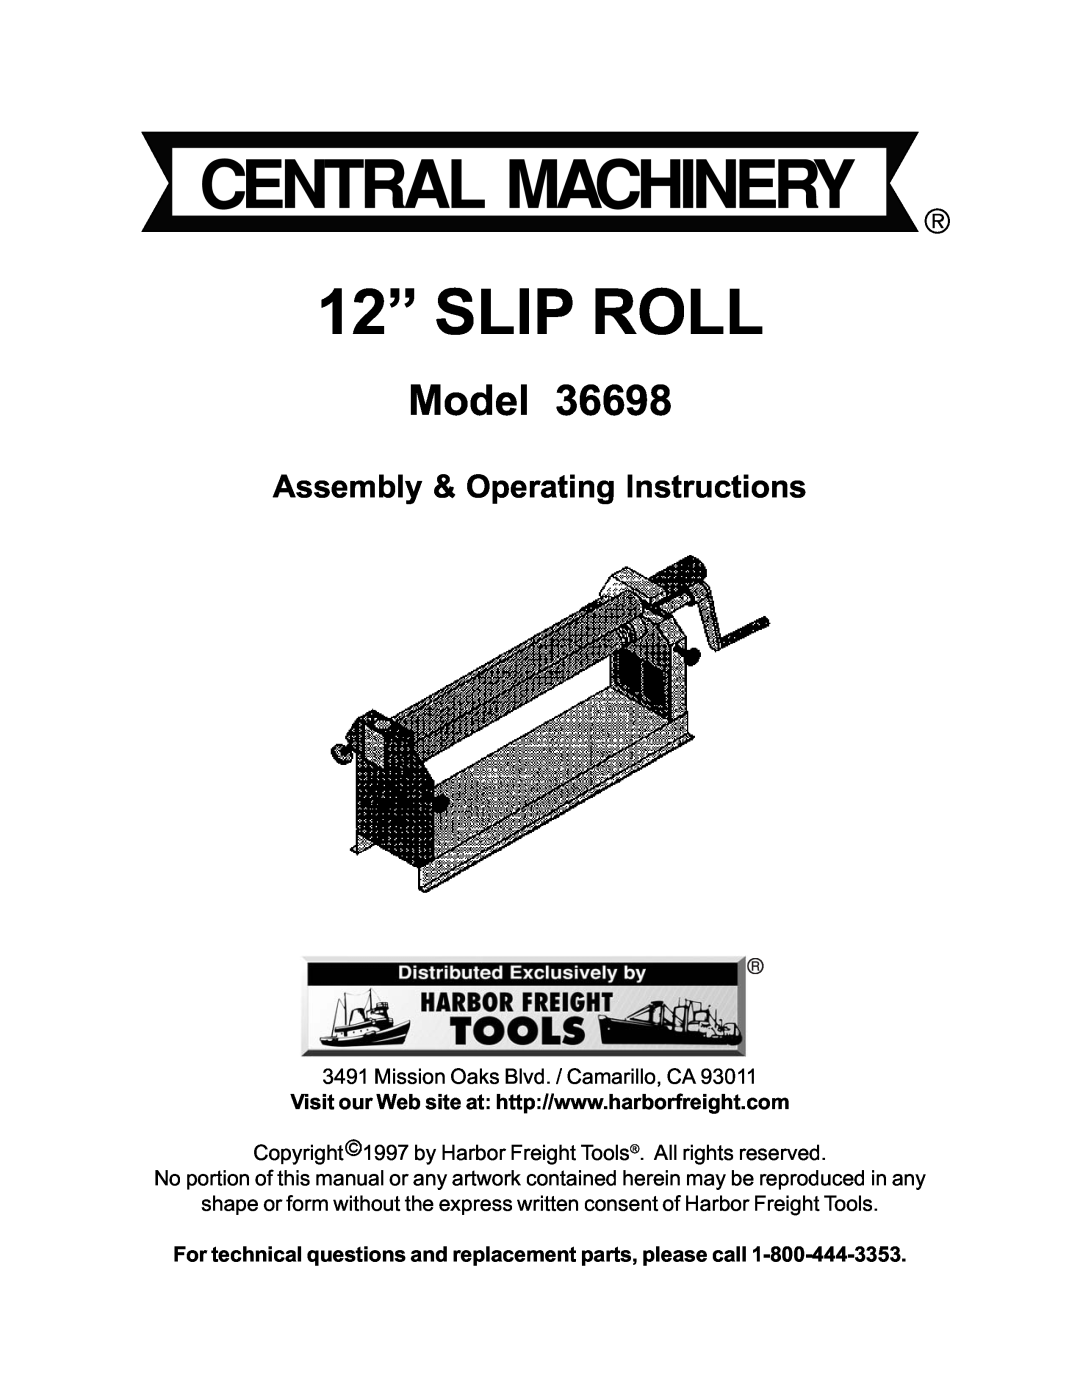 Harbor Freight Tools 36698 operating instructions 12” SLIP ROLL, Model, Assembly & Operating Instructions 